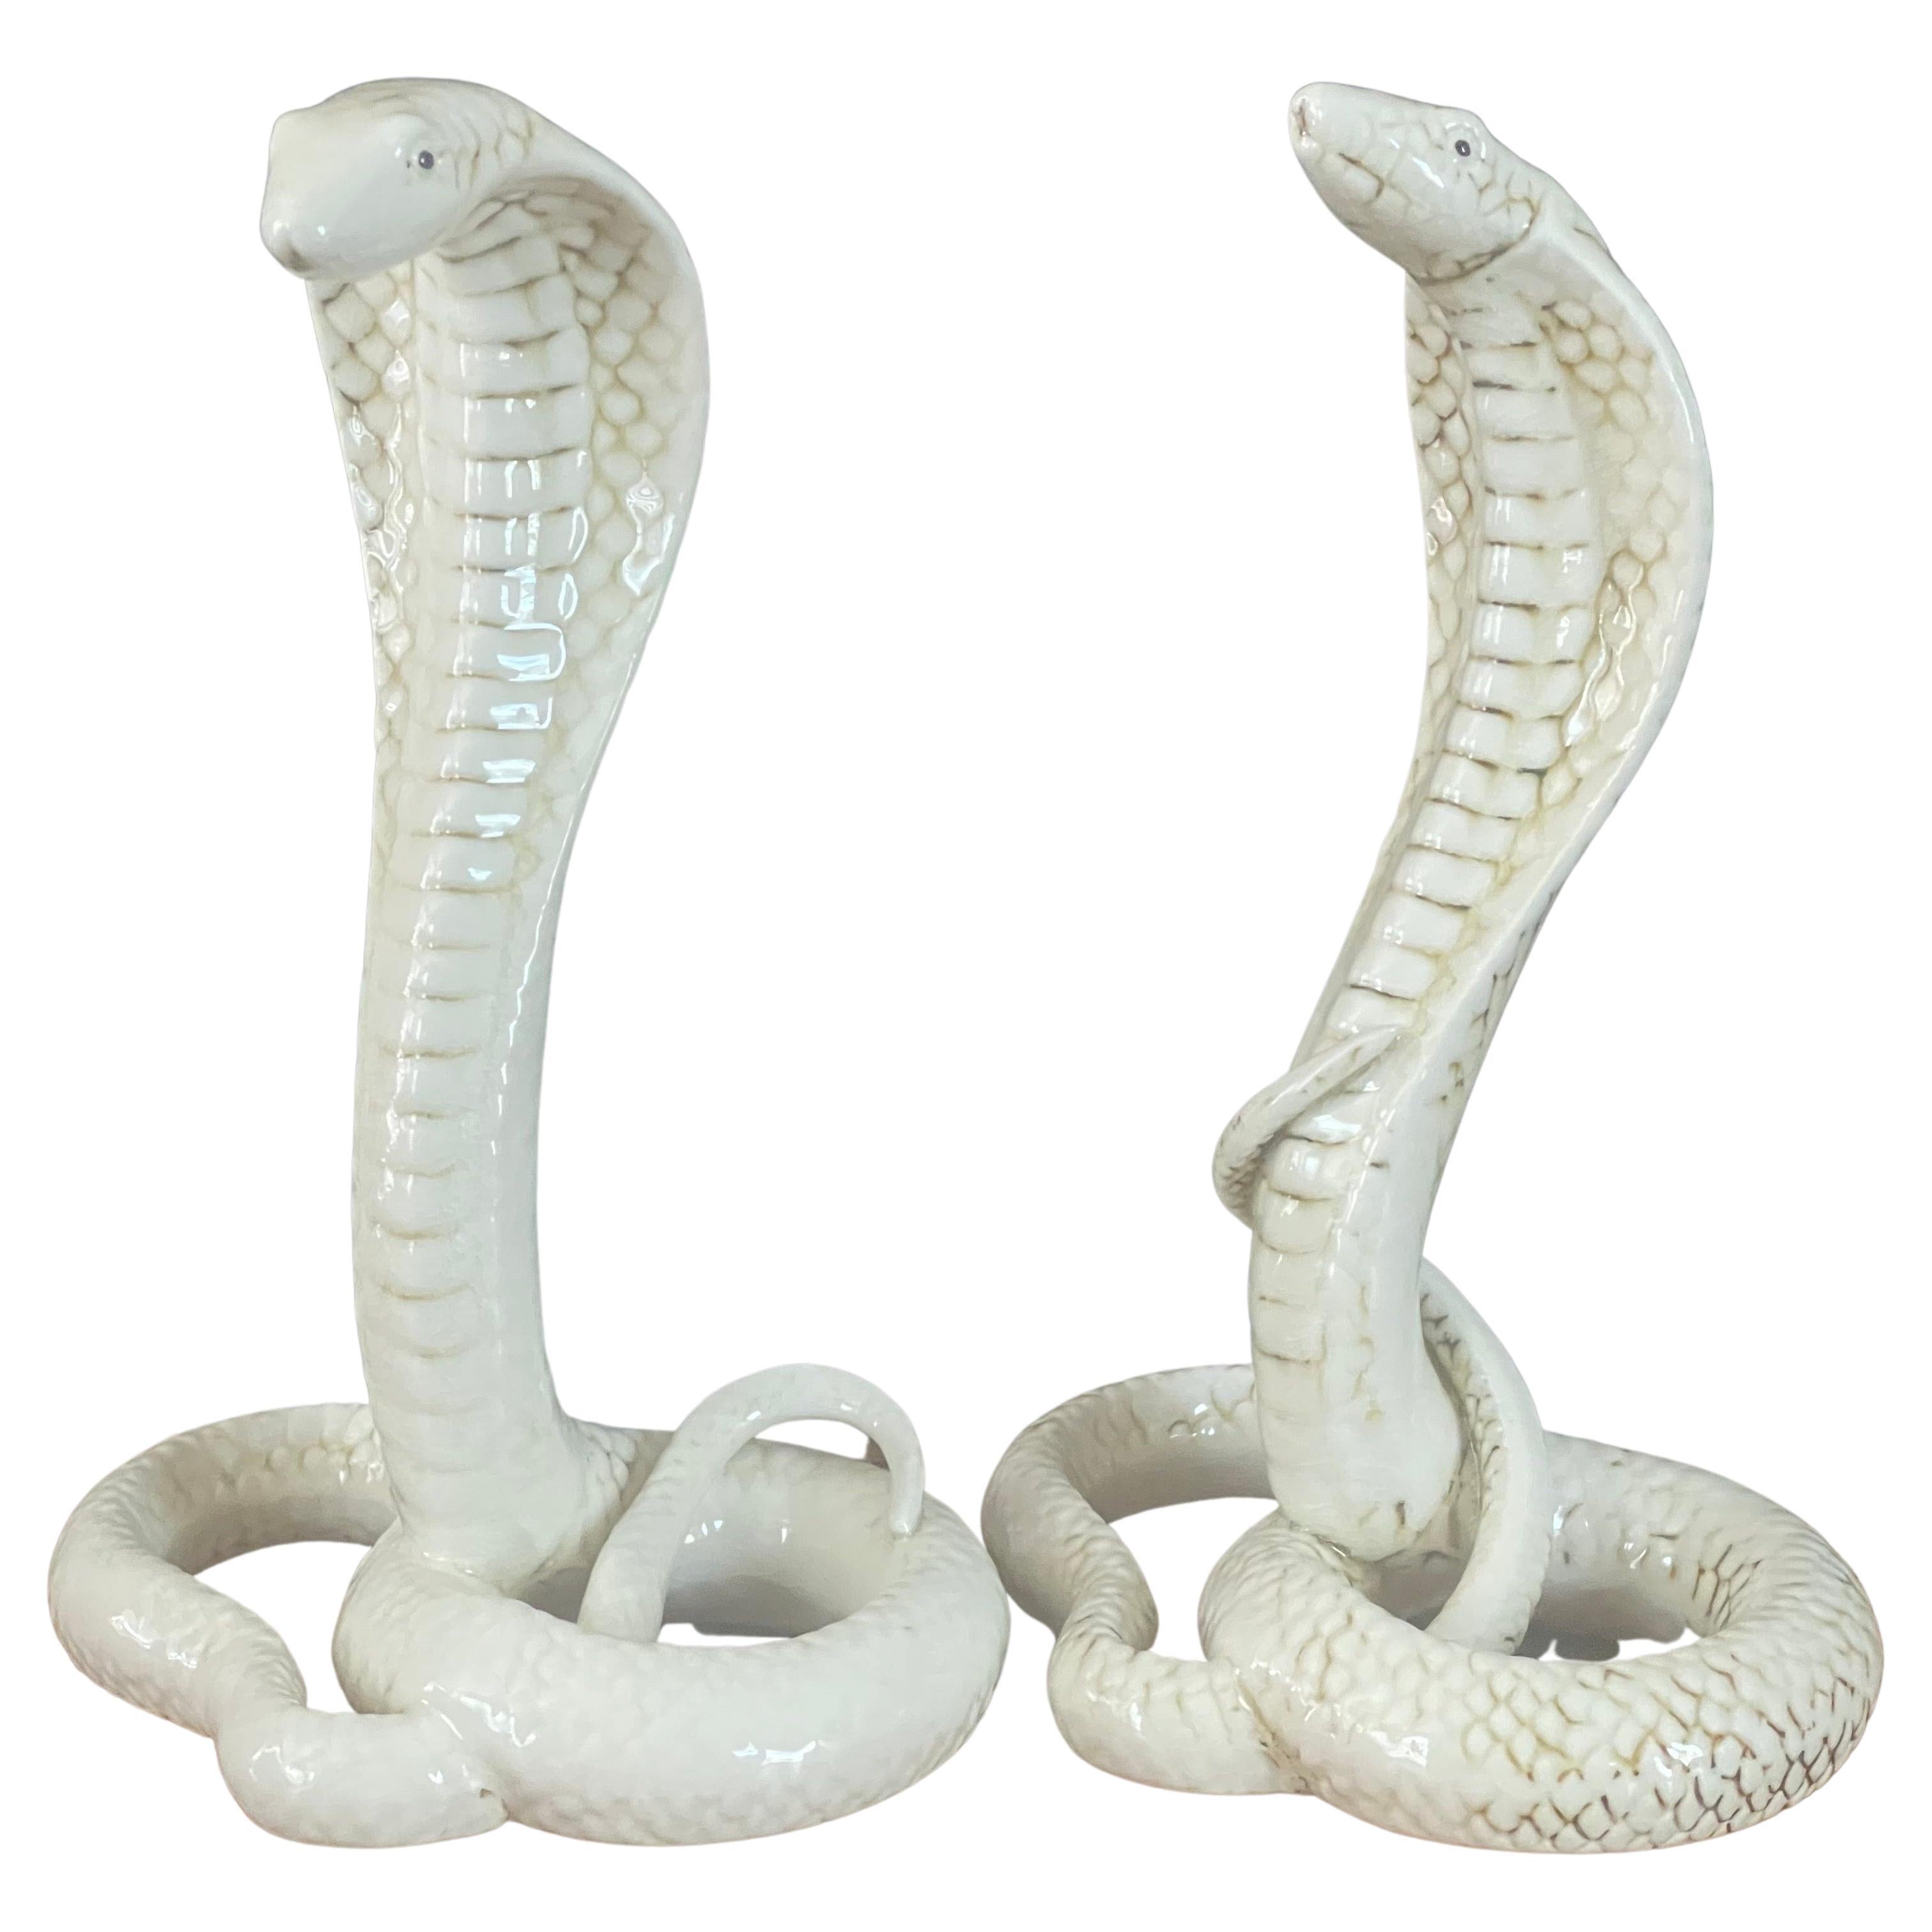 A fabulous pair of ceramic King Cobra snake sculptures, circa 1970s. The cobras are in very good vintage condition with no chips or cracks and measure 7.5